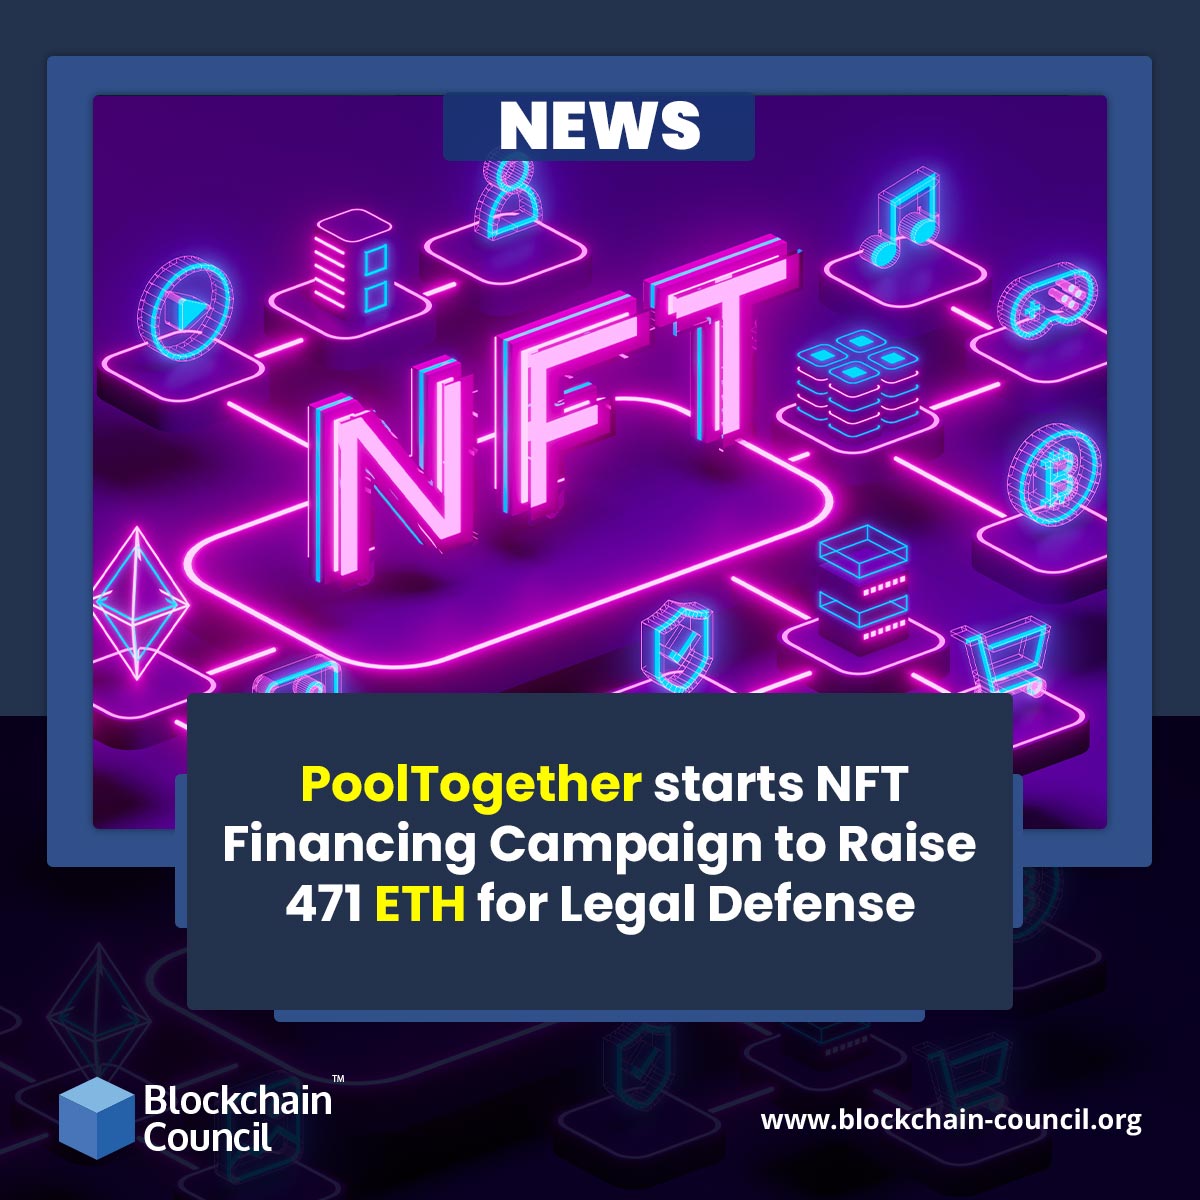 PoolTogether starts NFT Financing Campaign to Raise 471 ETH for Legal Defense